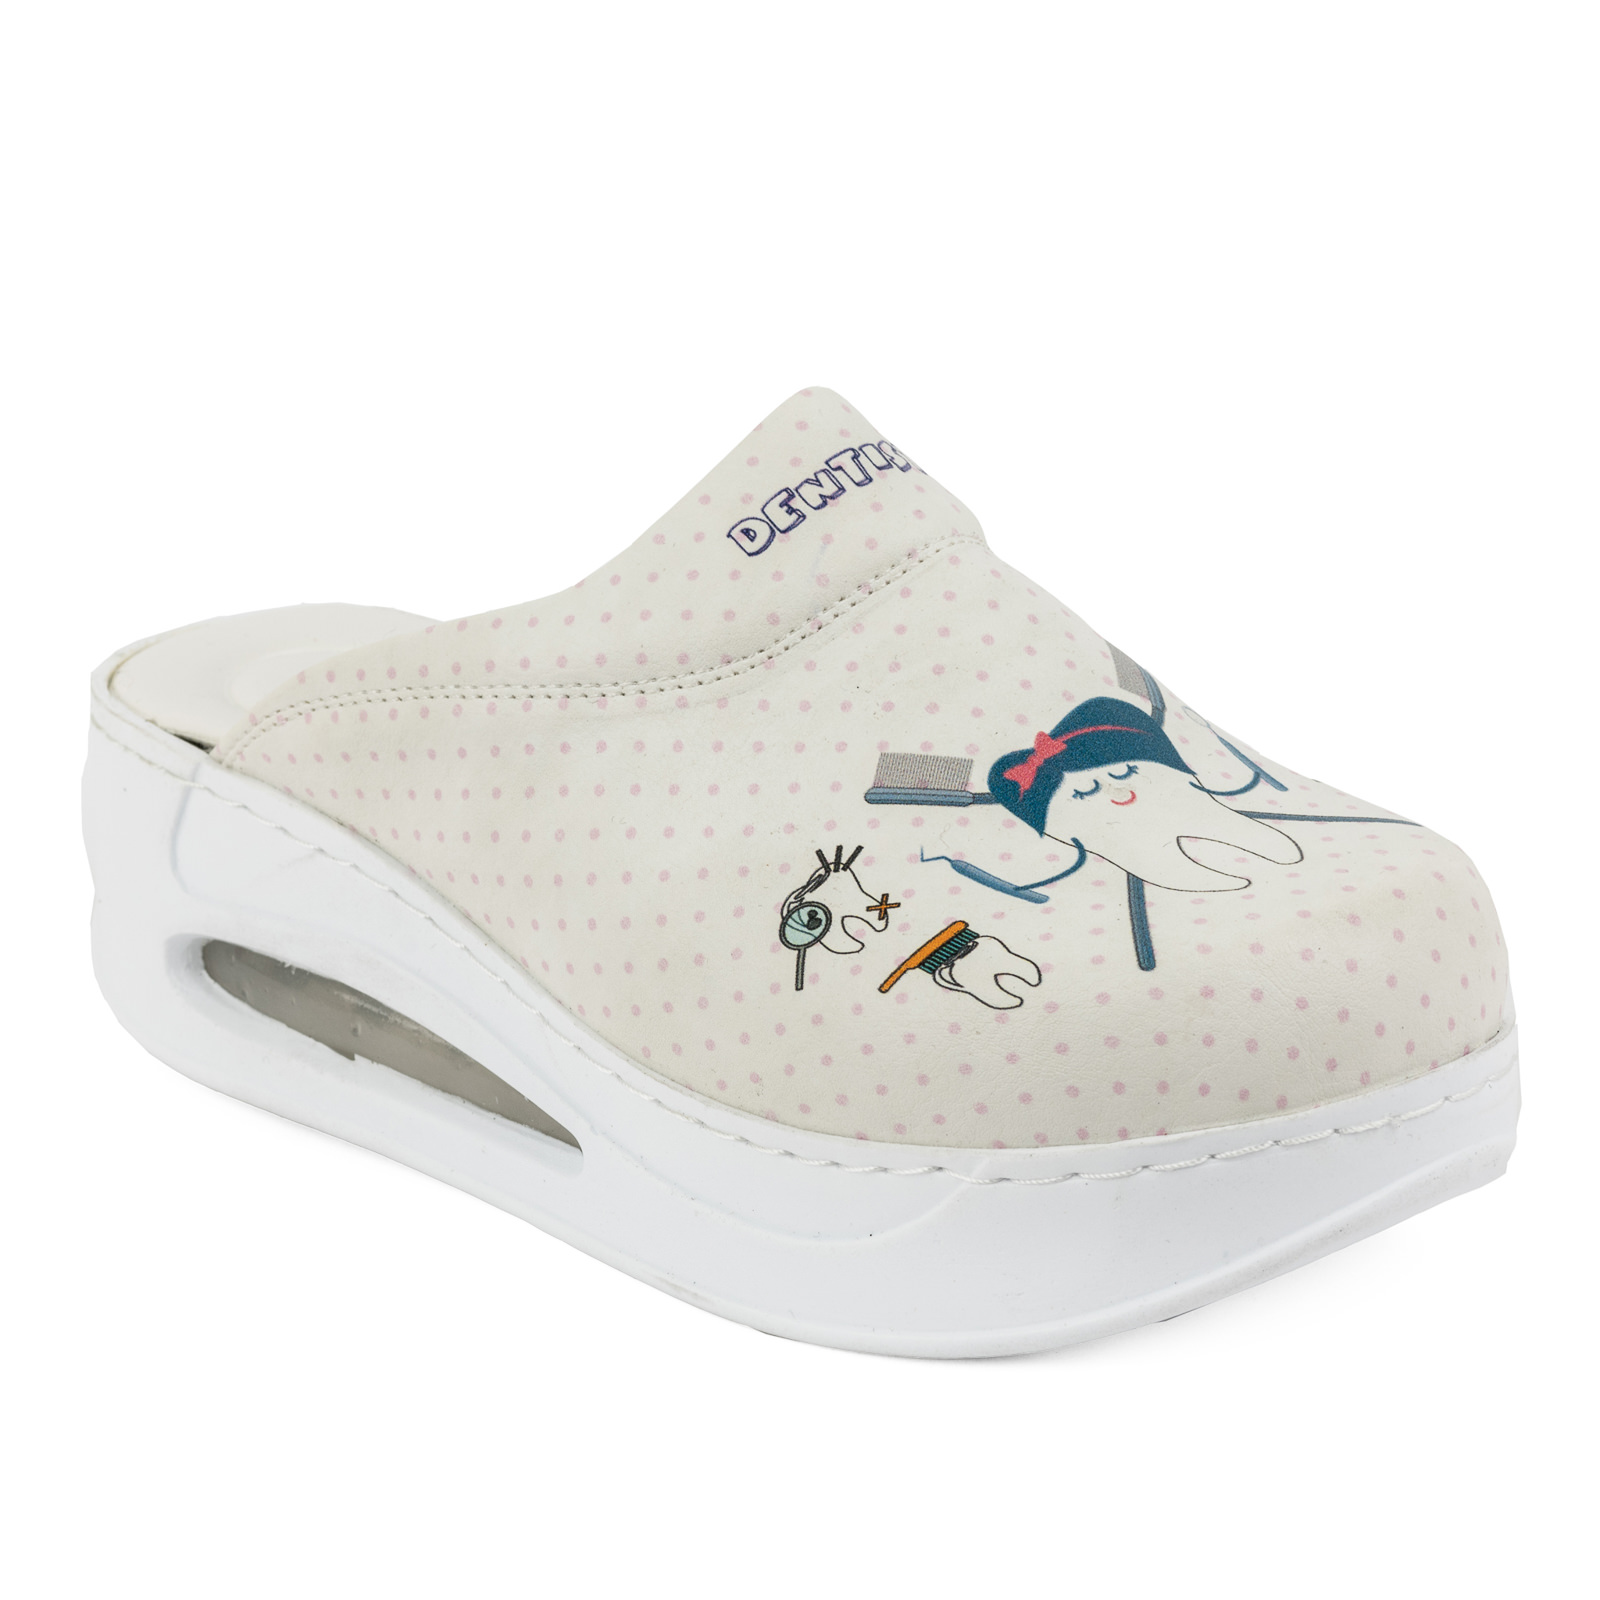 Patterned women clogs A102 - DENTIST AIR - WHITE